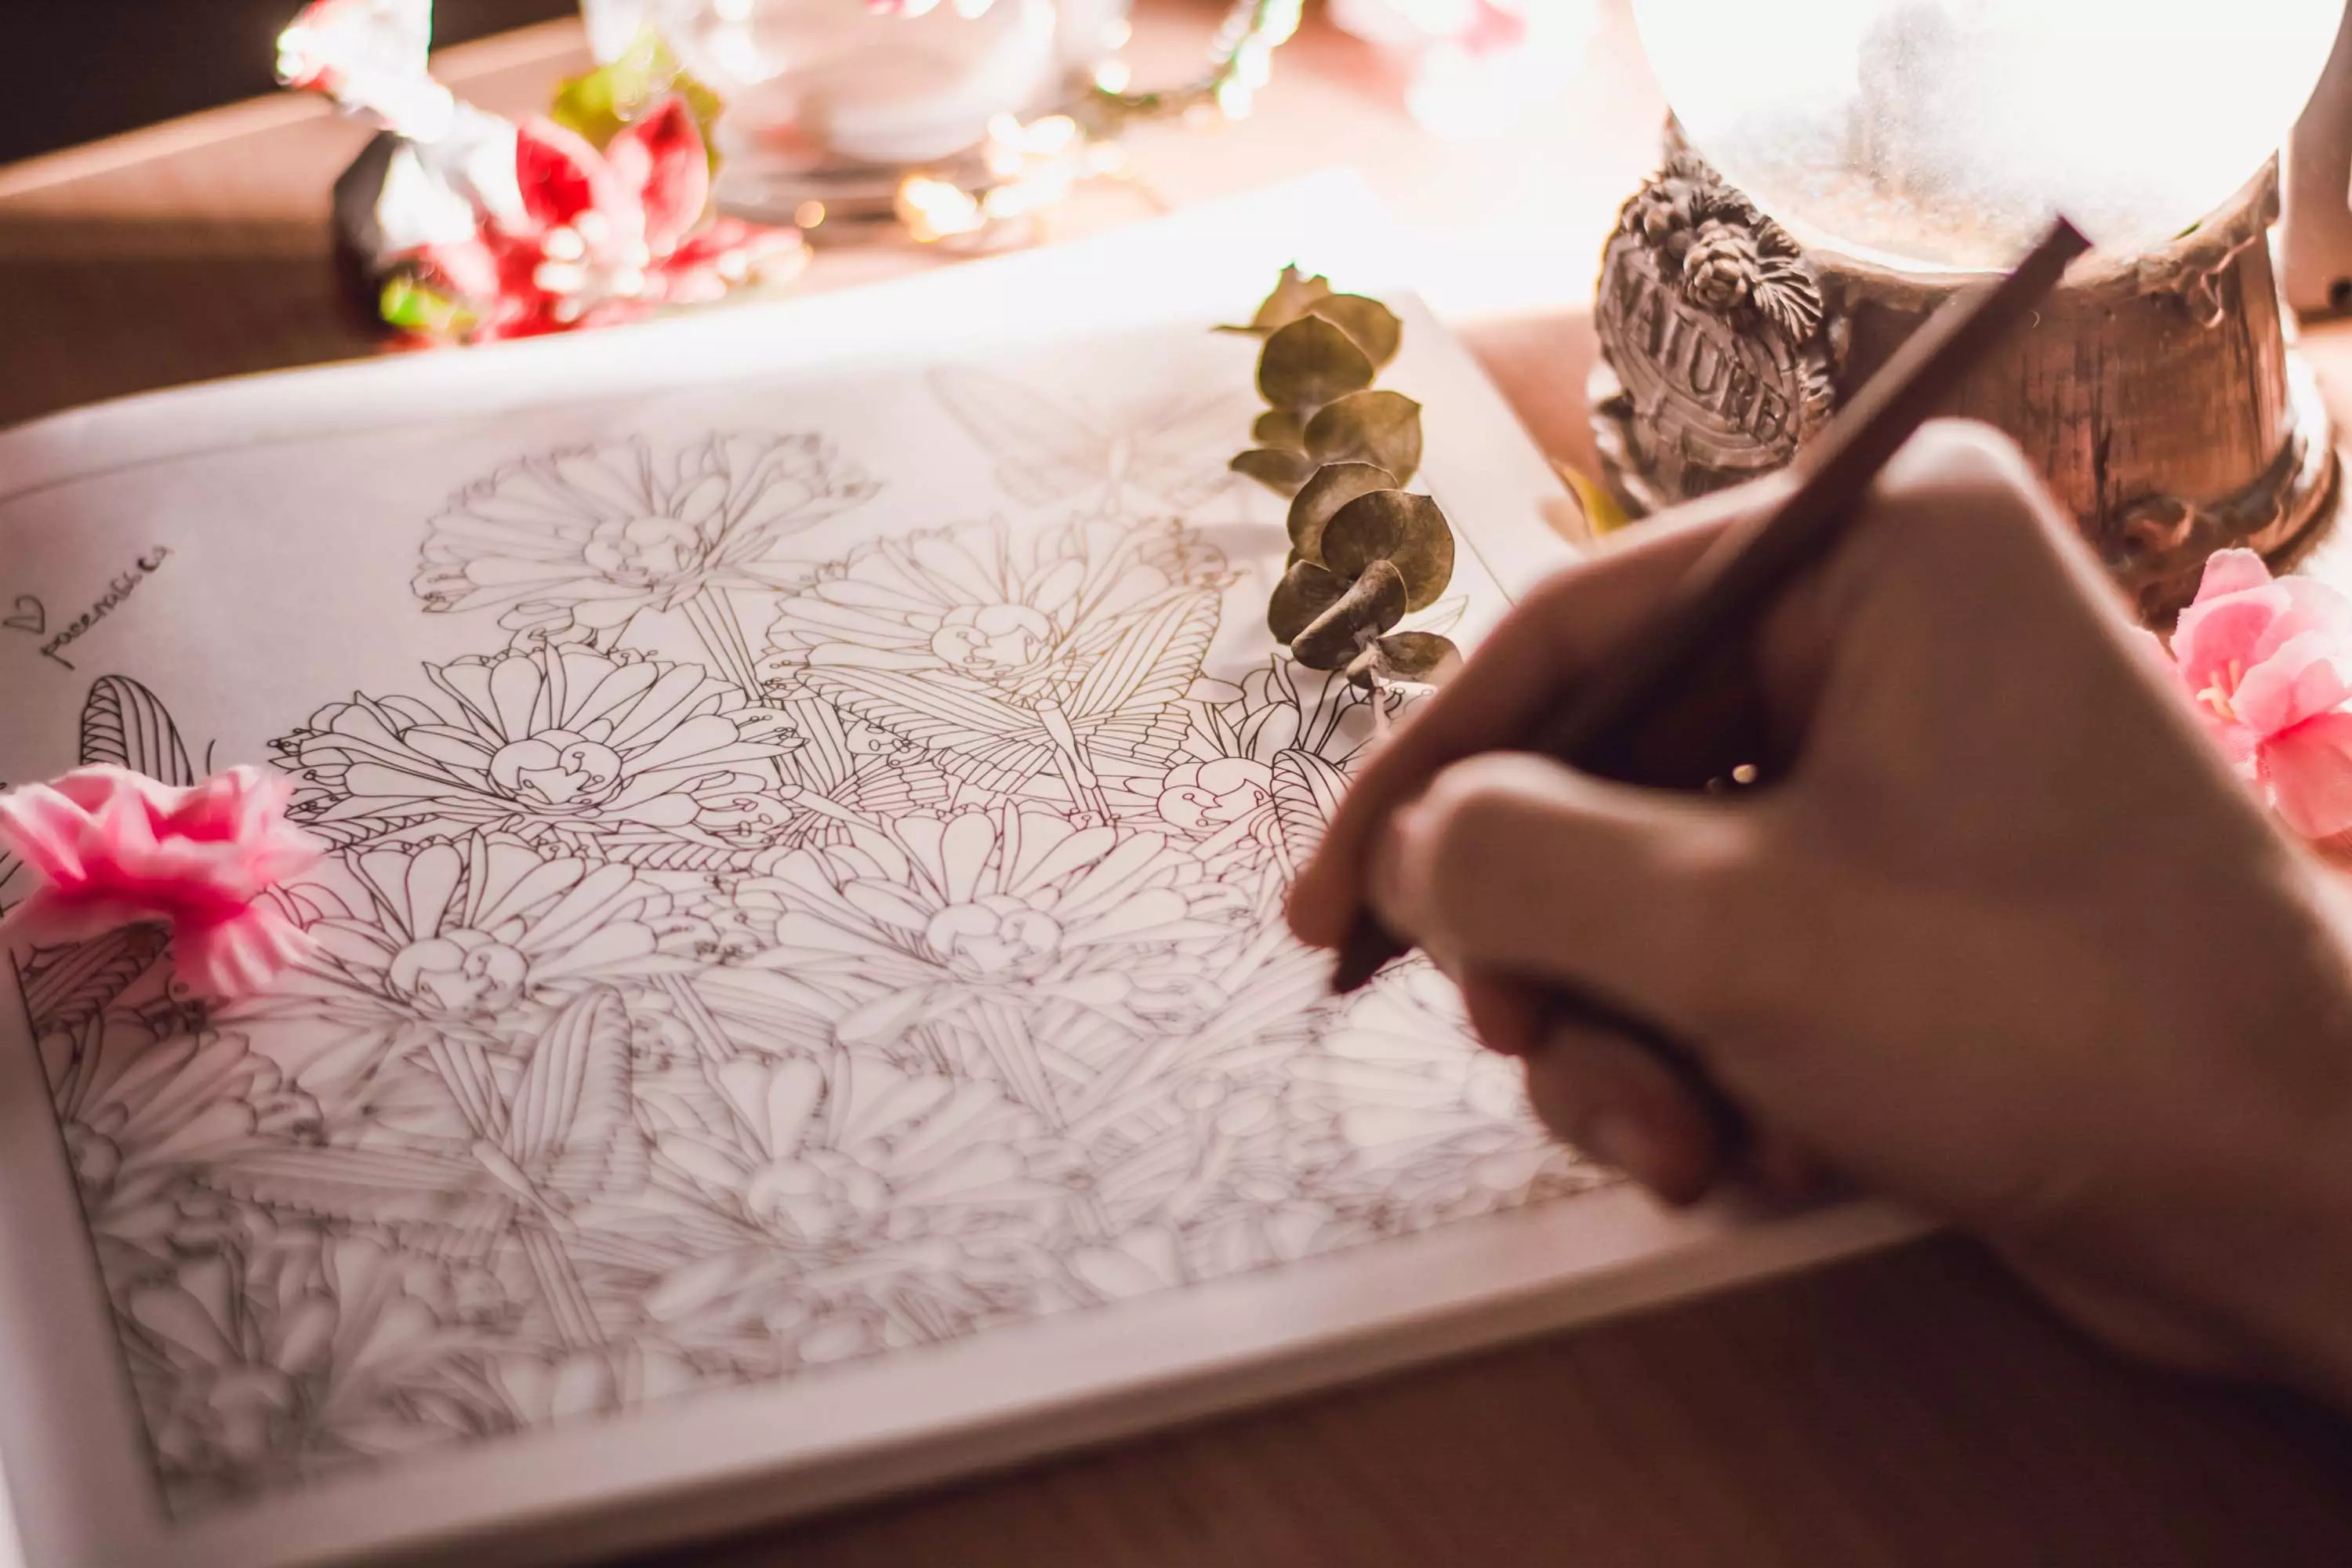 Studies suggest colouring can relieve anxiety.